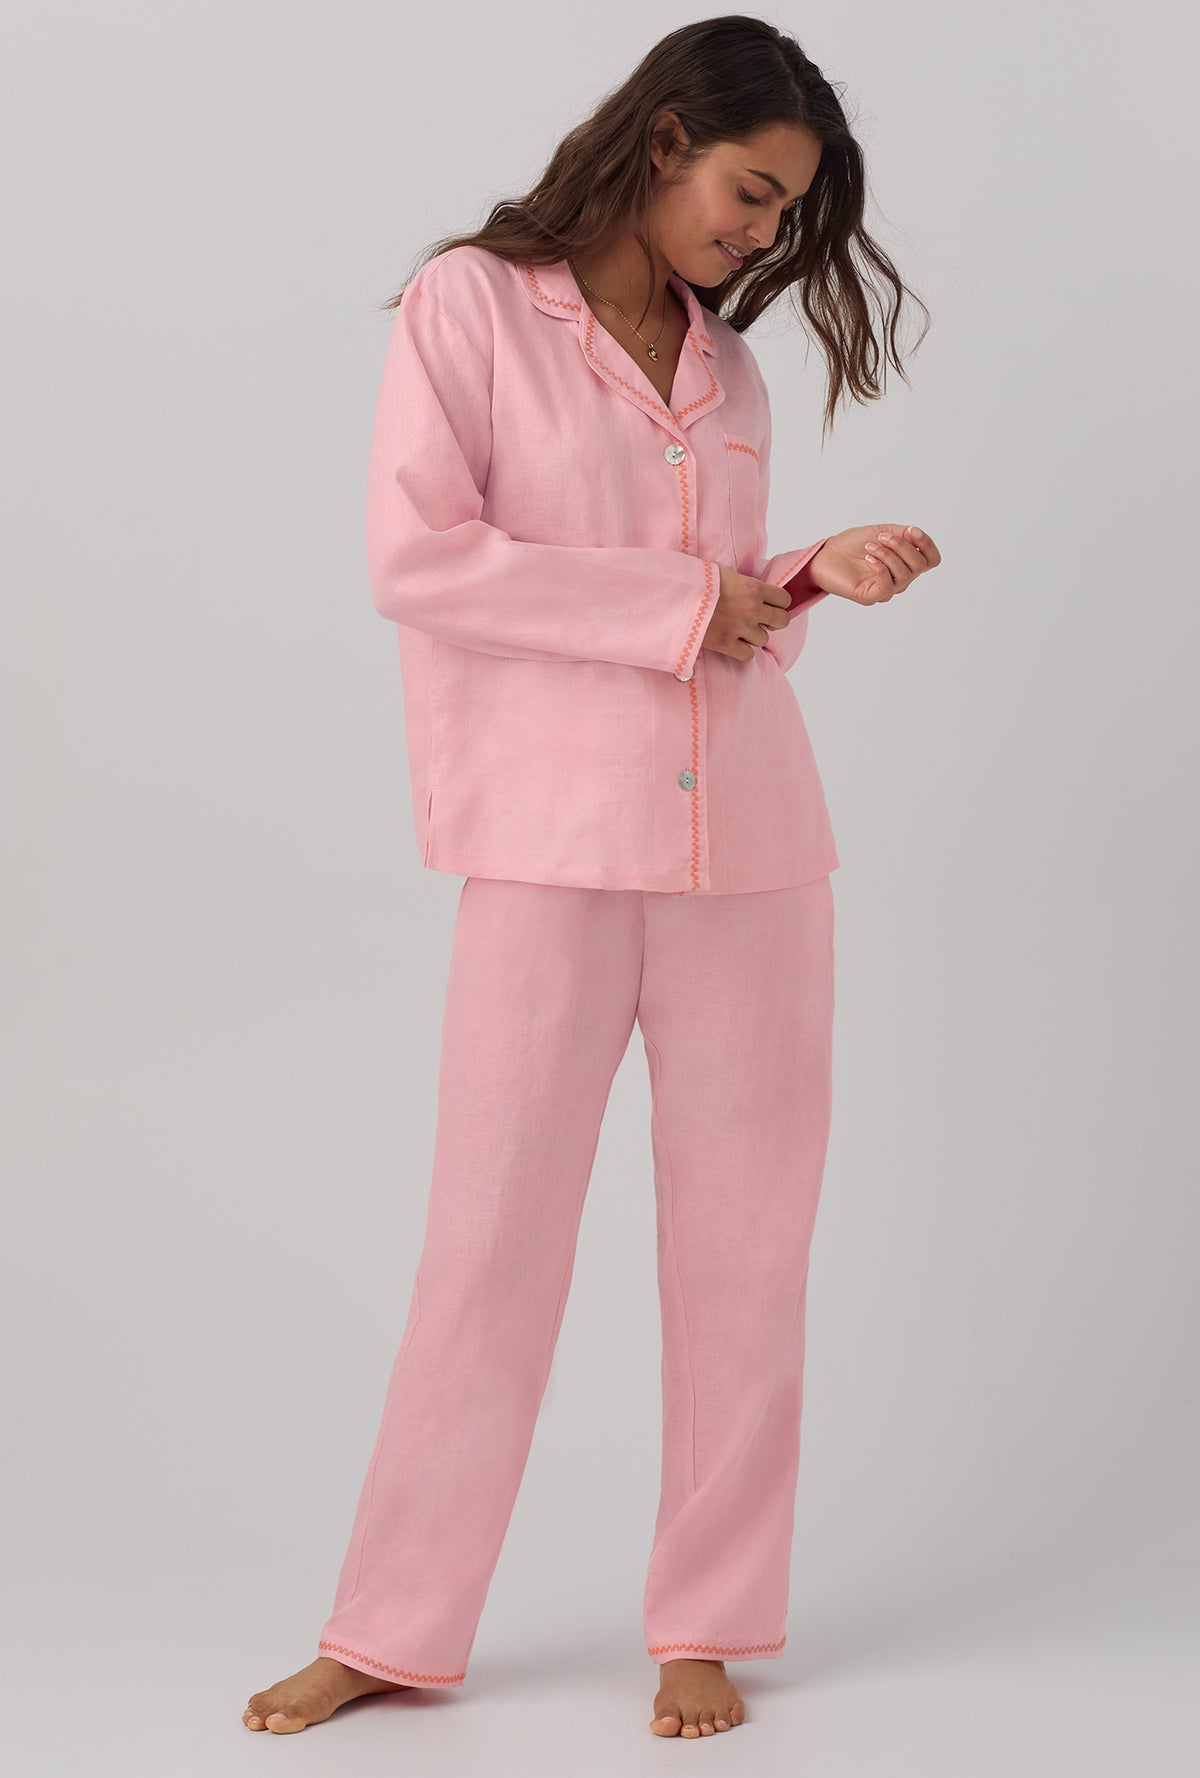 A lady wearing pink Long Sleeve Classic Linen PJ Set with Orchid Pink print.